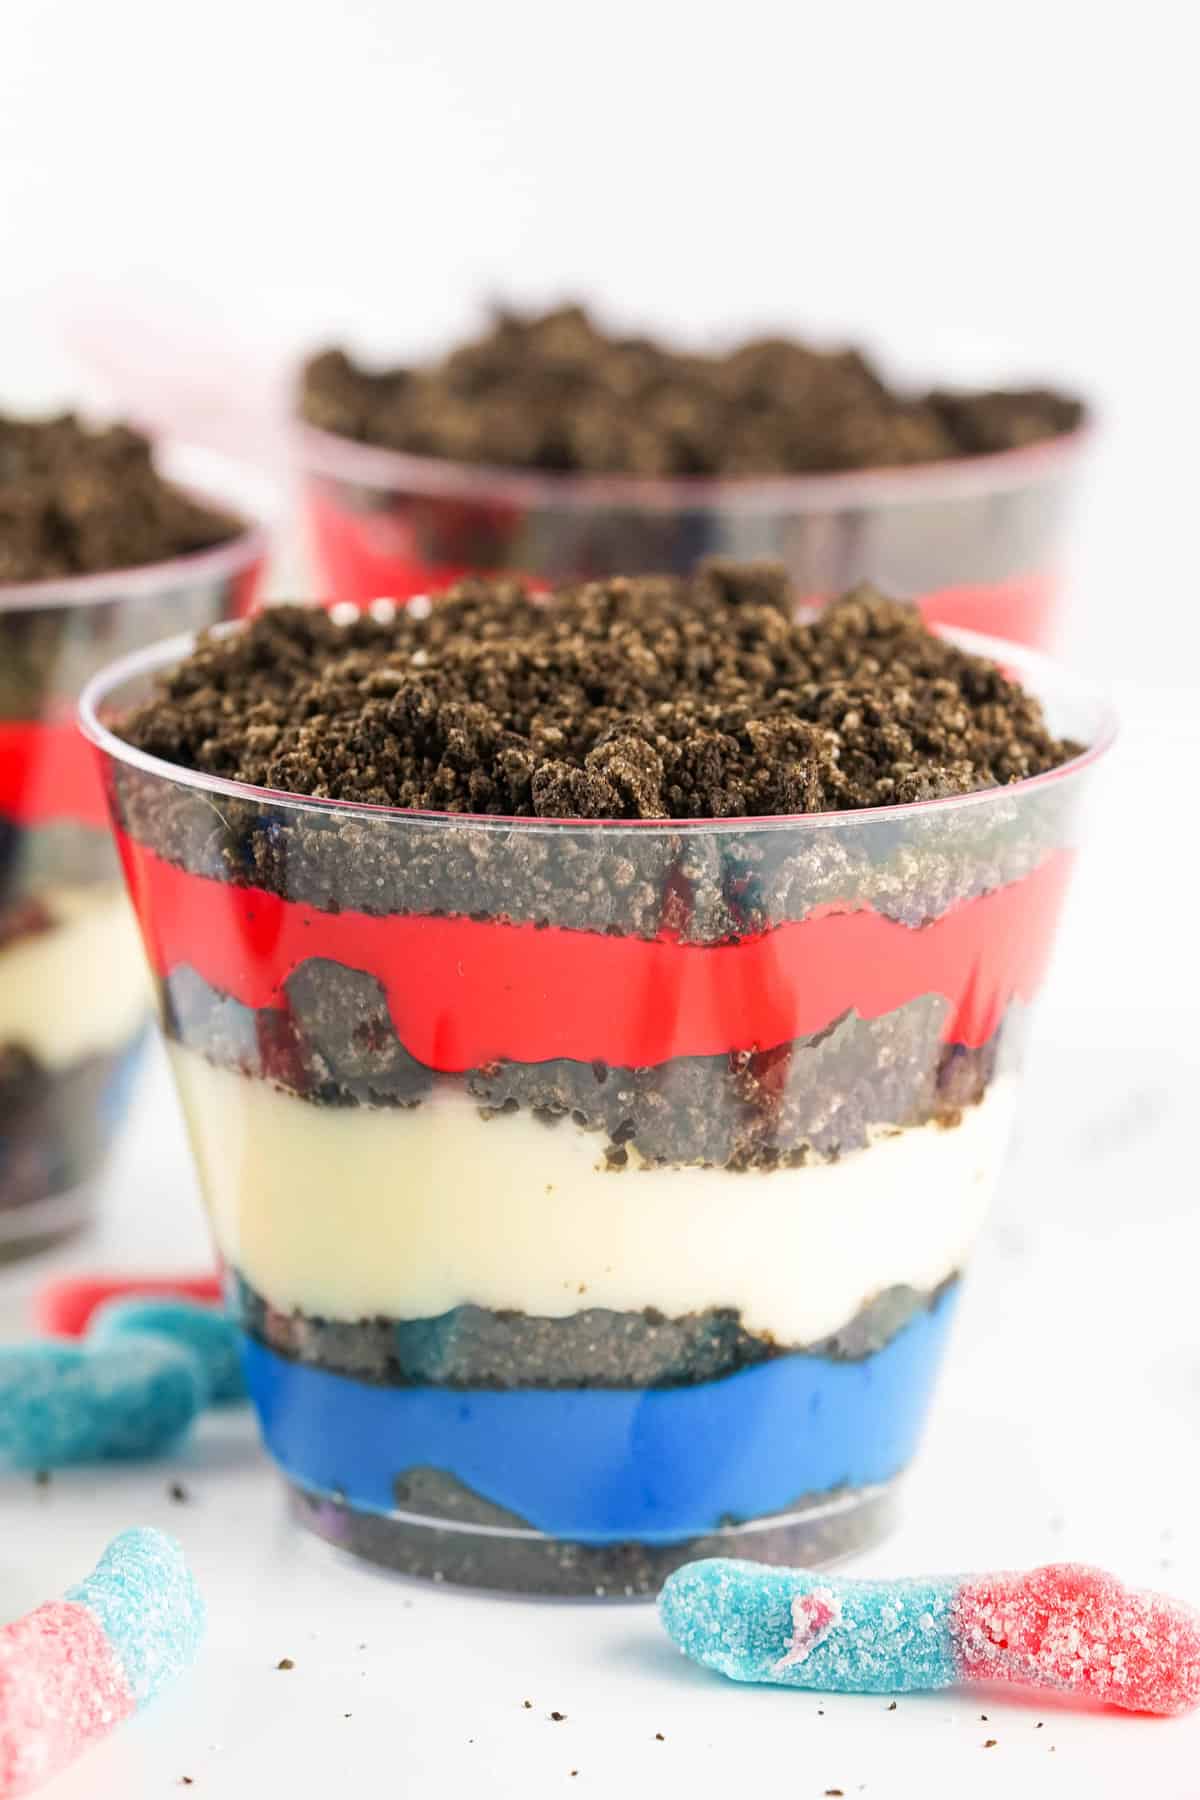 Then Add More Oreos, Red Pudding and More Oreos on top to complete the Dirt Cups.